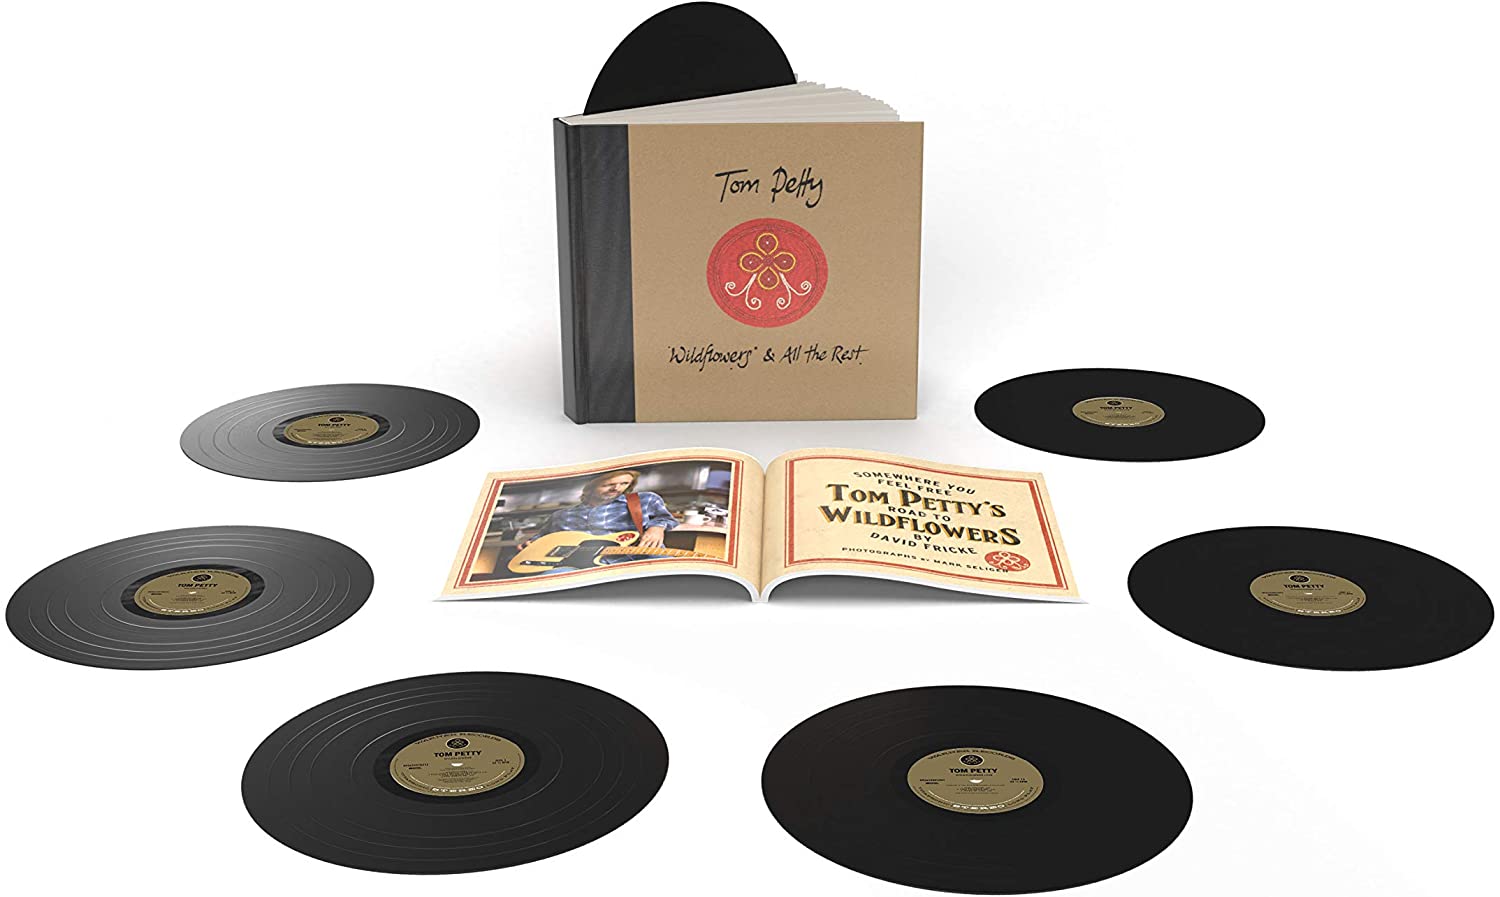 Tom Petty / Wildflowers & All The Rest 7LP box set